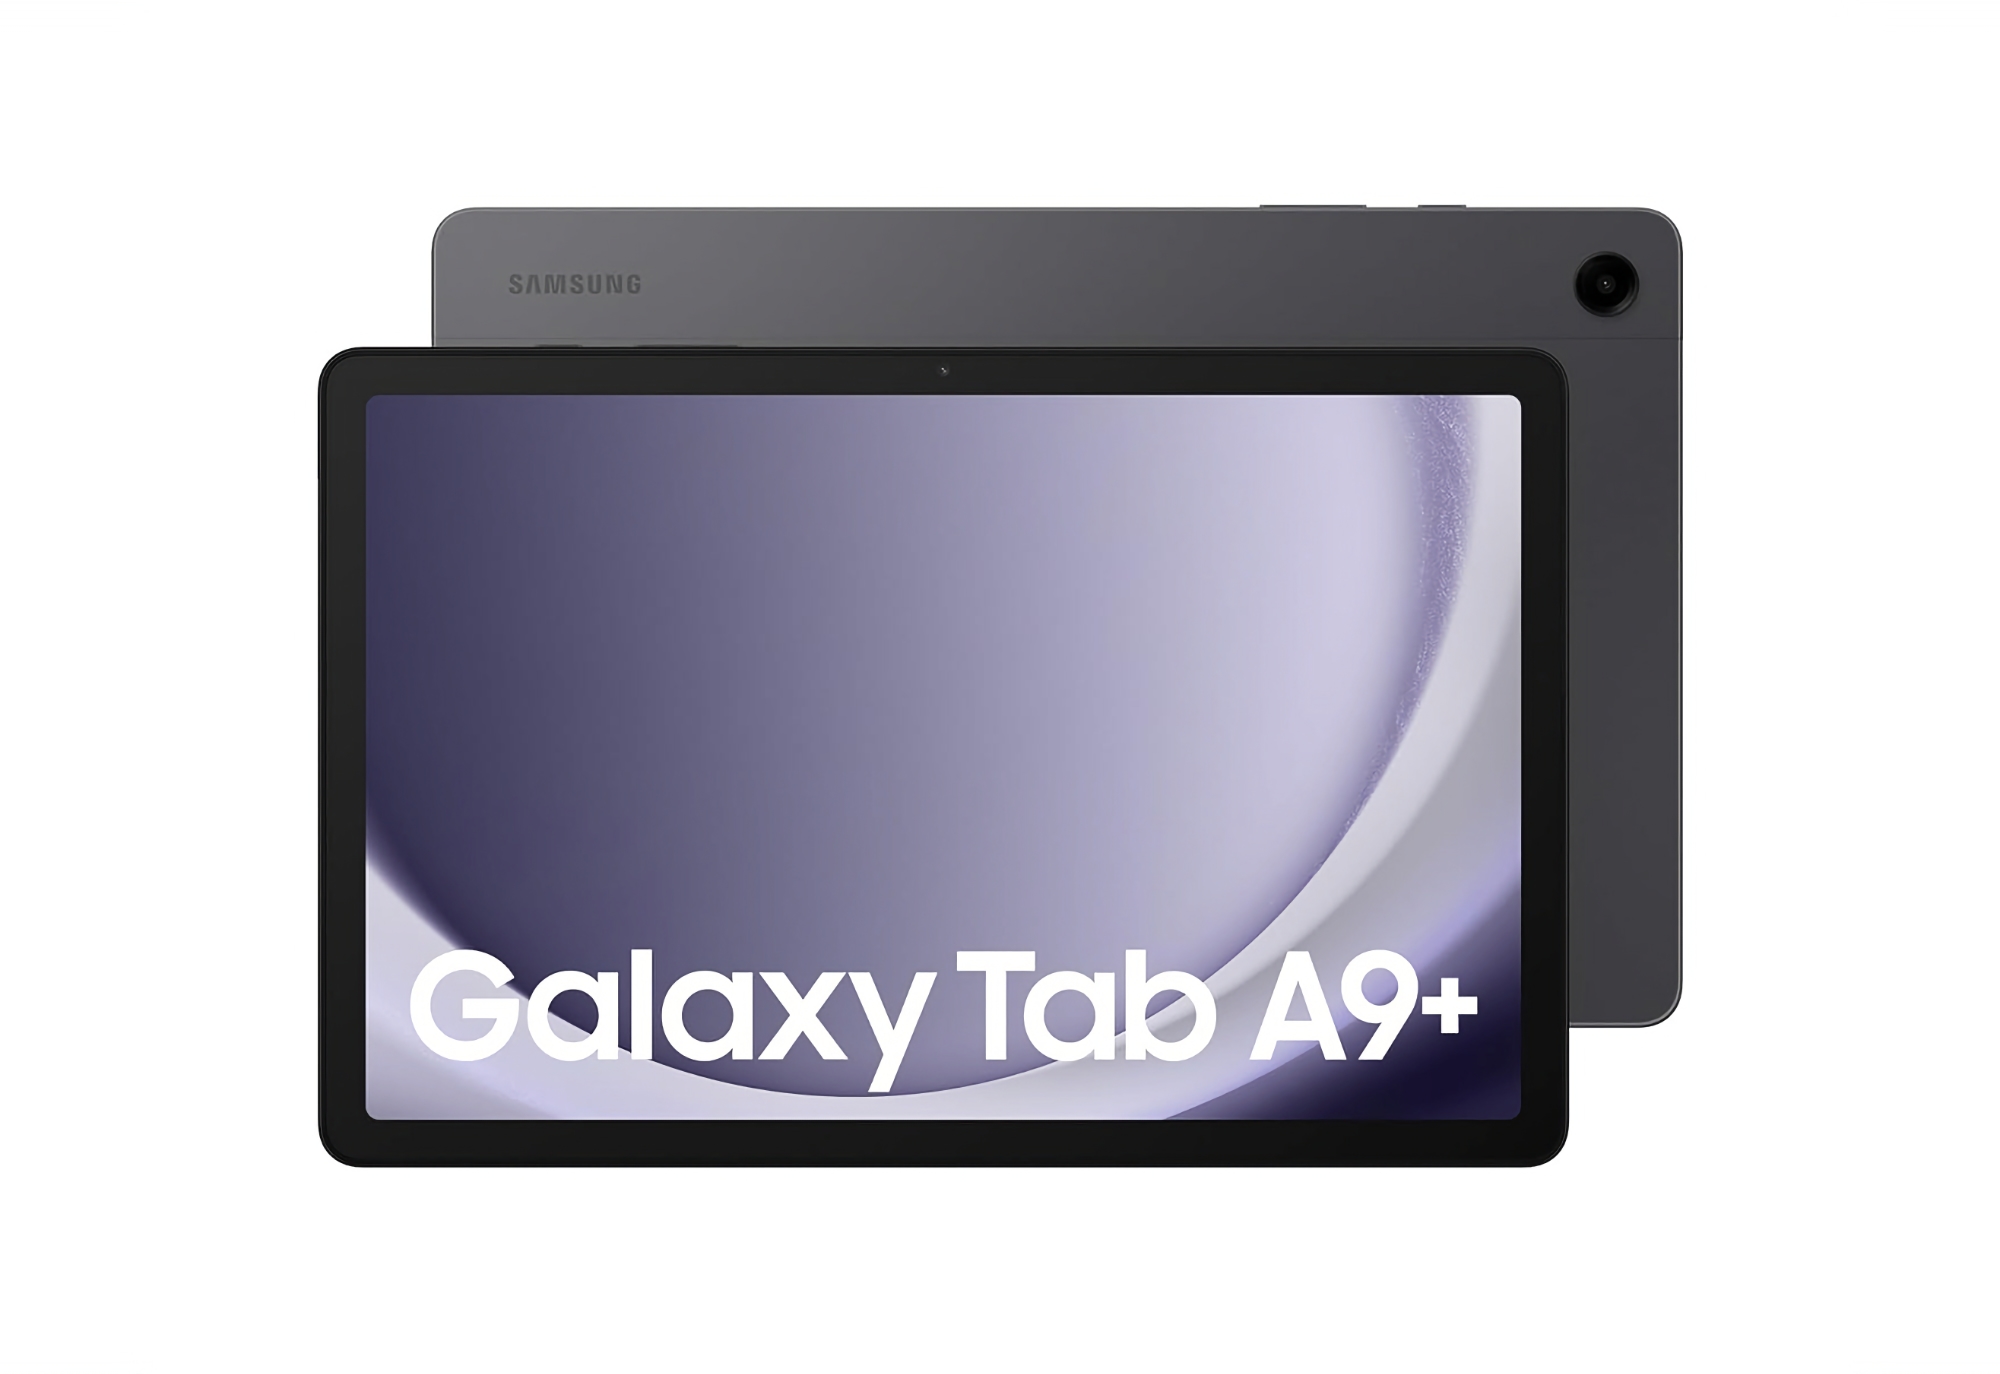 Samsung Galaxy Tab A9+: 11-inch 90Hz display, Snapdragon 695 chip, four AKG speakers, 5G and a 7040mAh battery for $252